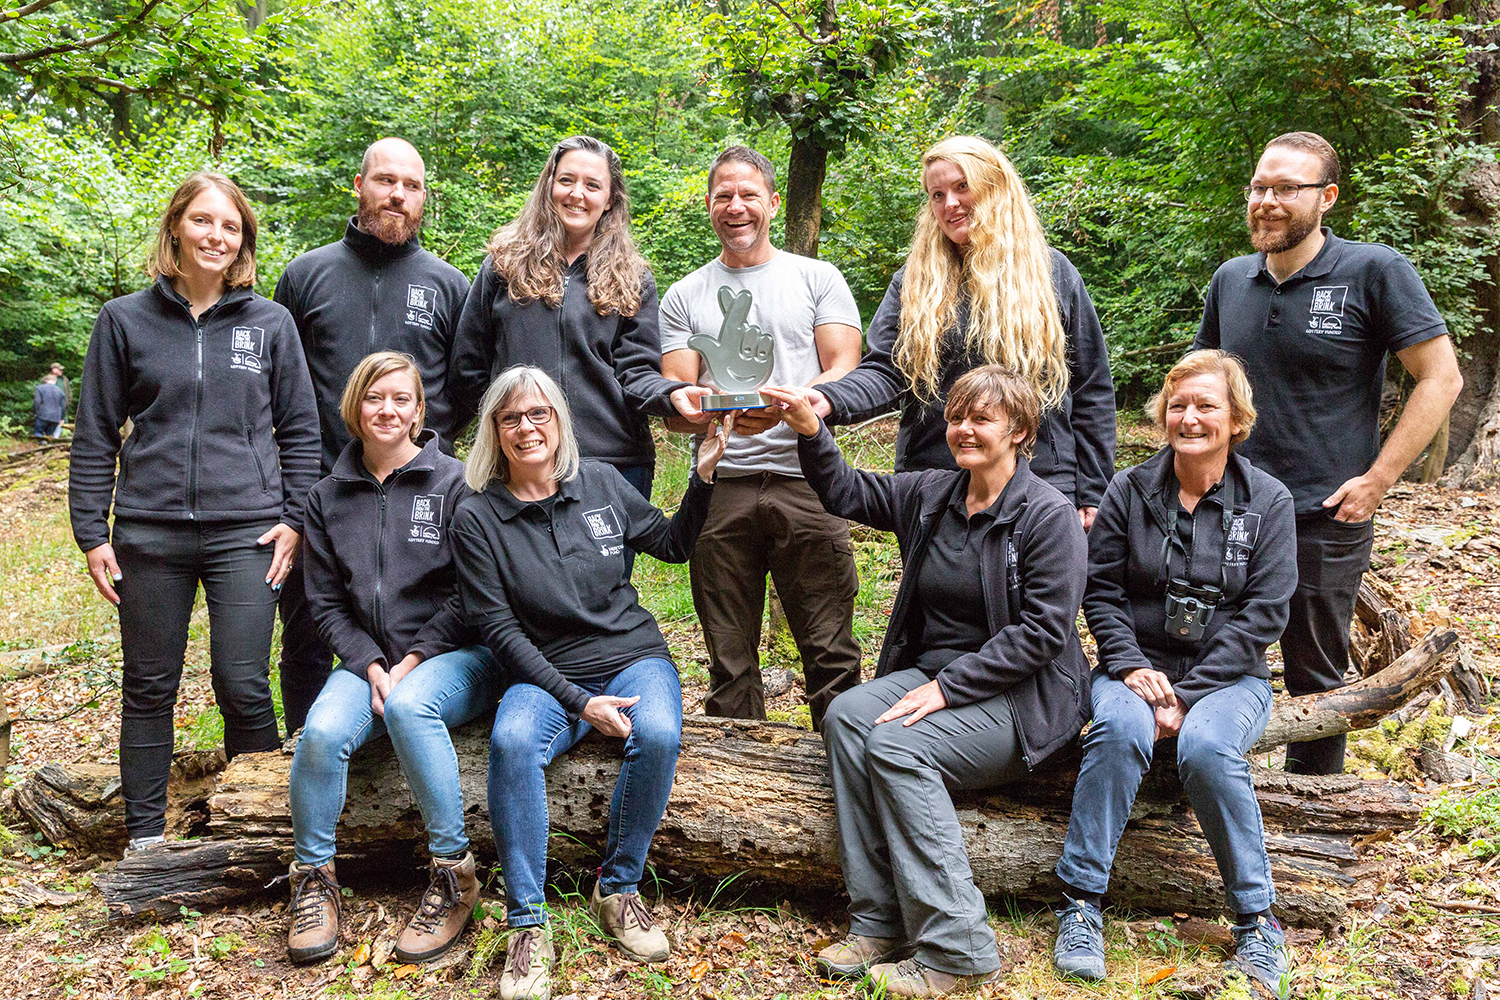 Steve Backshall and the Back from the Brink team